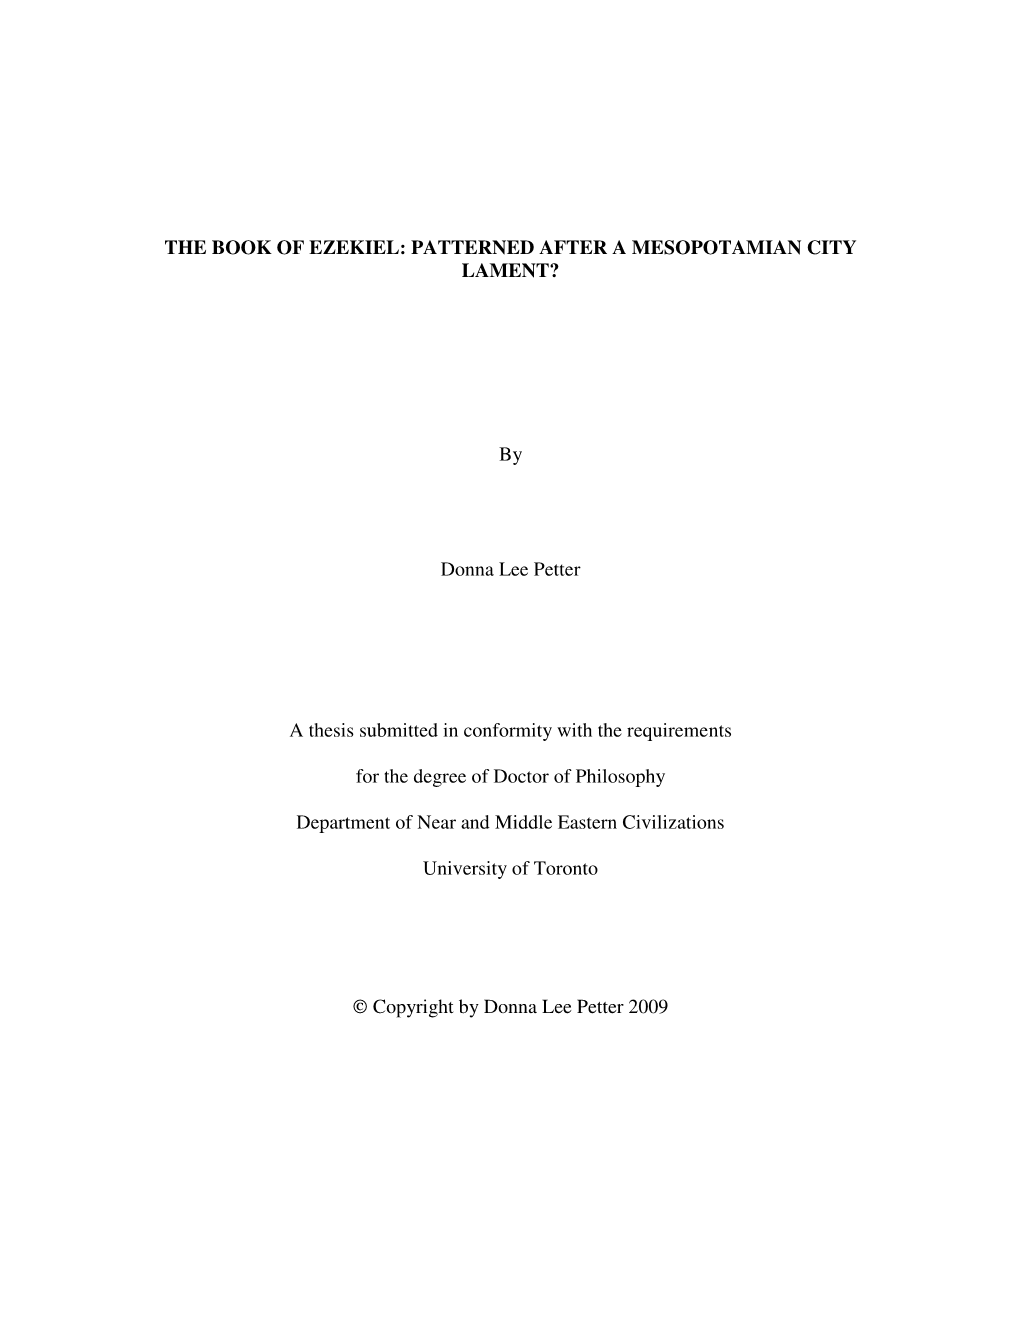 THE BOOK of EZEKIEL: PATTERNED AFTER a MESOPOTAMIAN CITY LAMENT? by Donna Lee Petter a Thesis Submitted in Conformity with the R